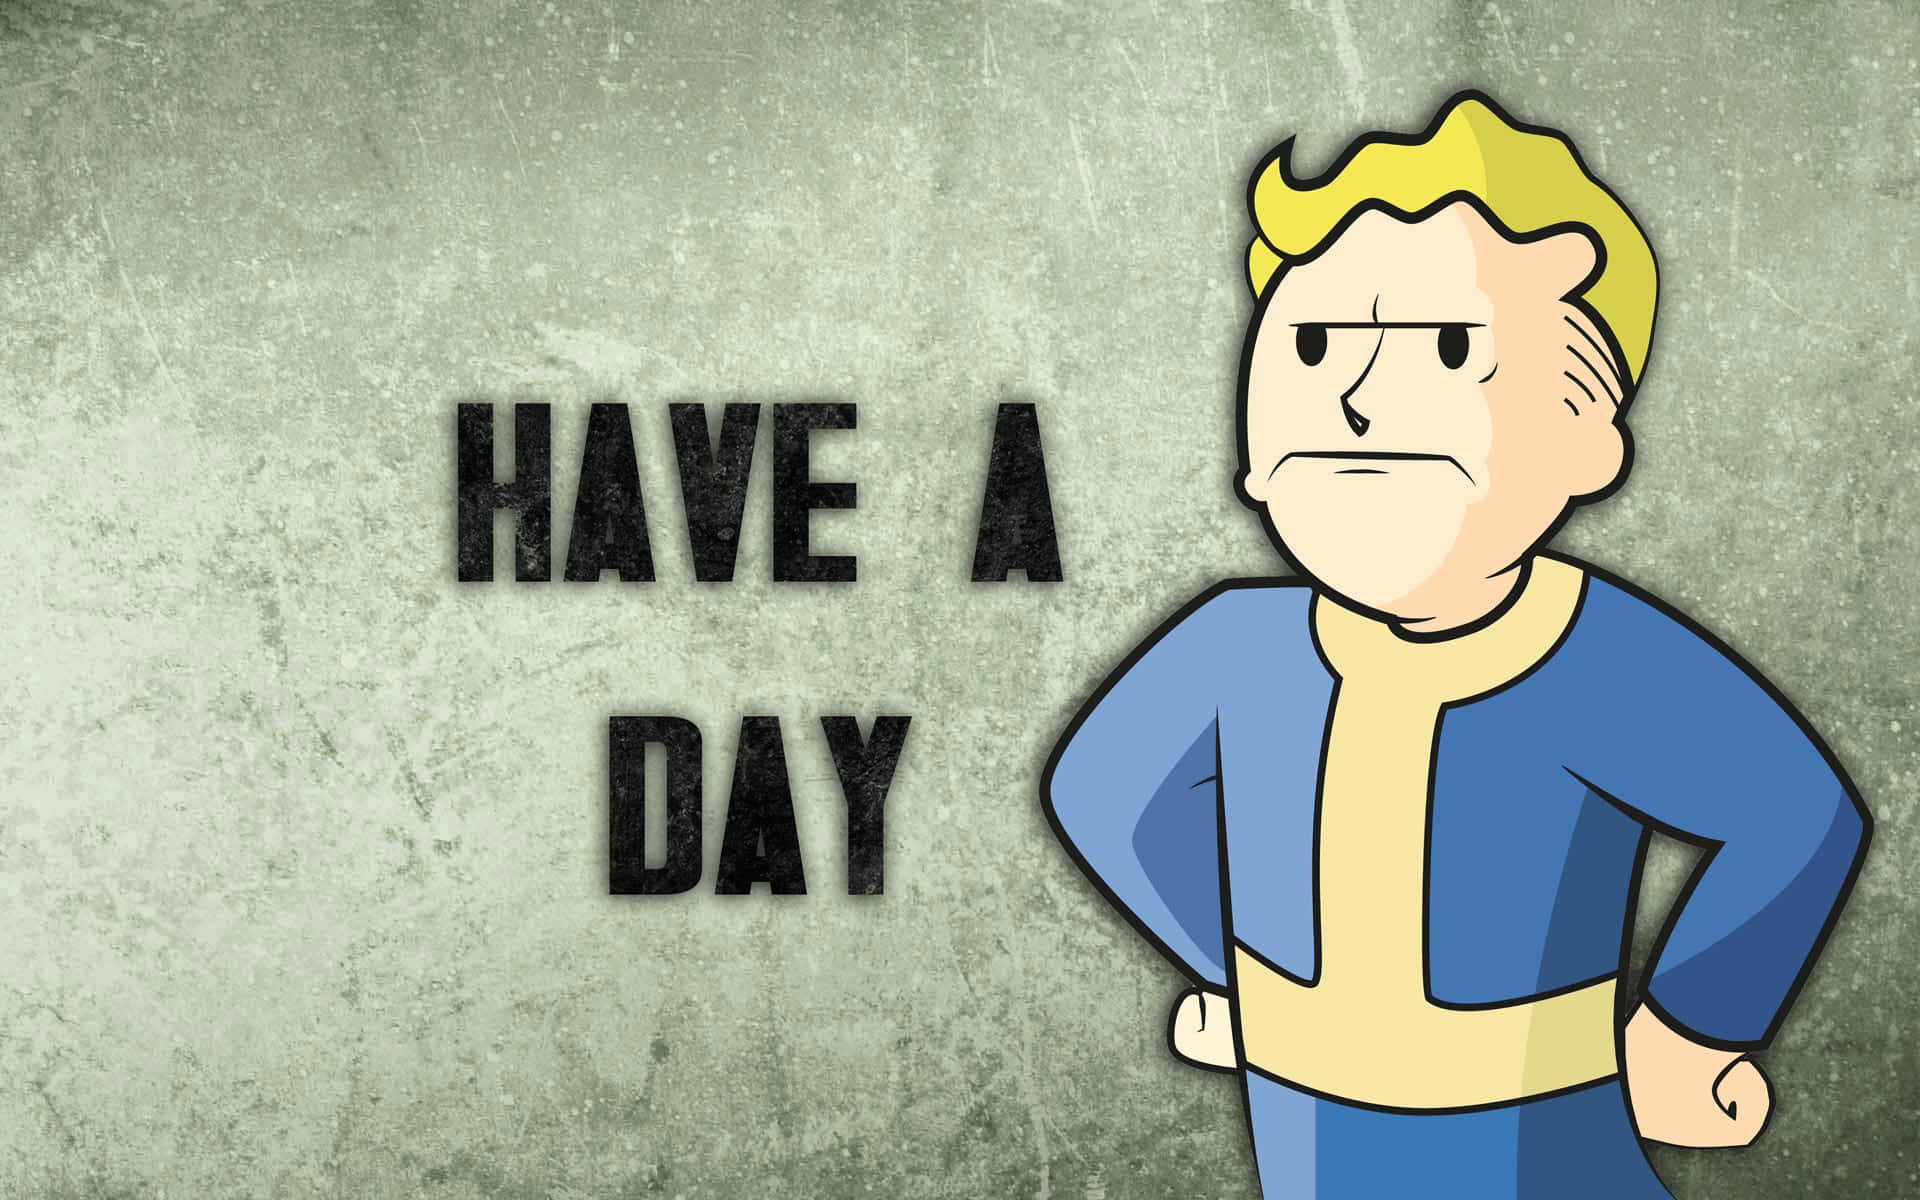 Fallout Shelter Game: A Post-Apocalyptic Safe Haven Wallpaper